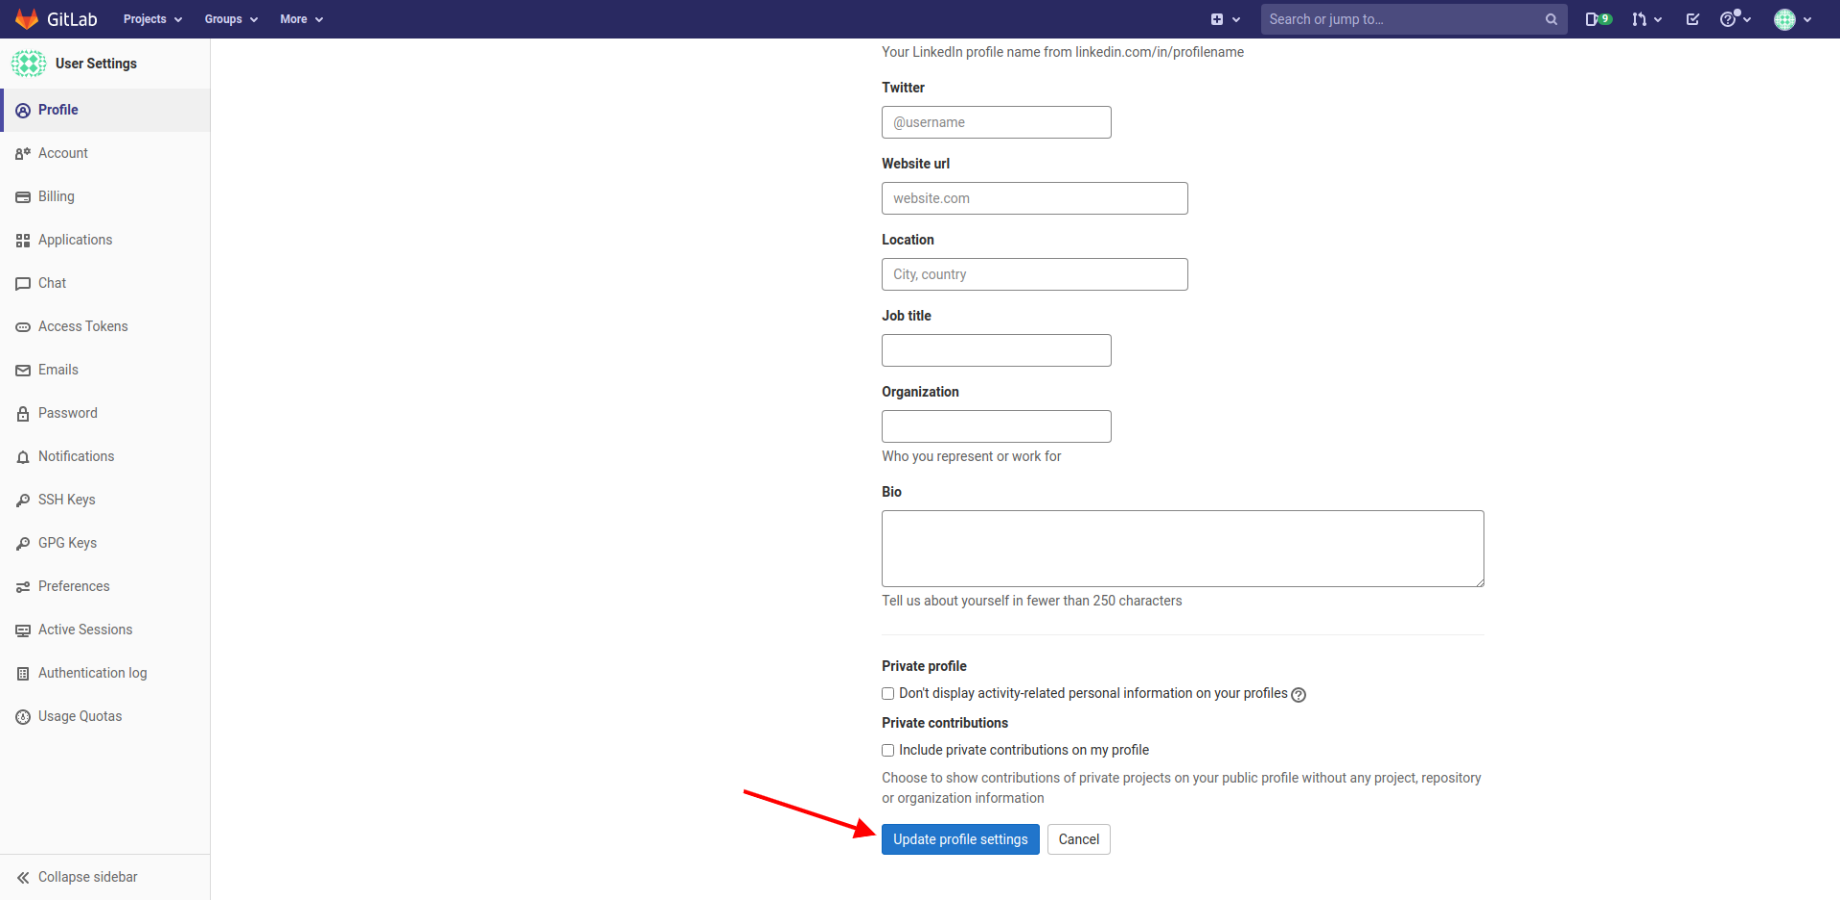 How to Change Email Visibility in GitLab - Projects & tasks migration ...